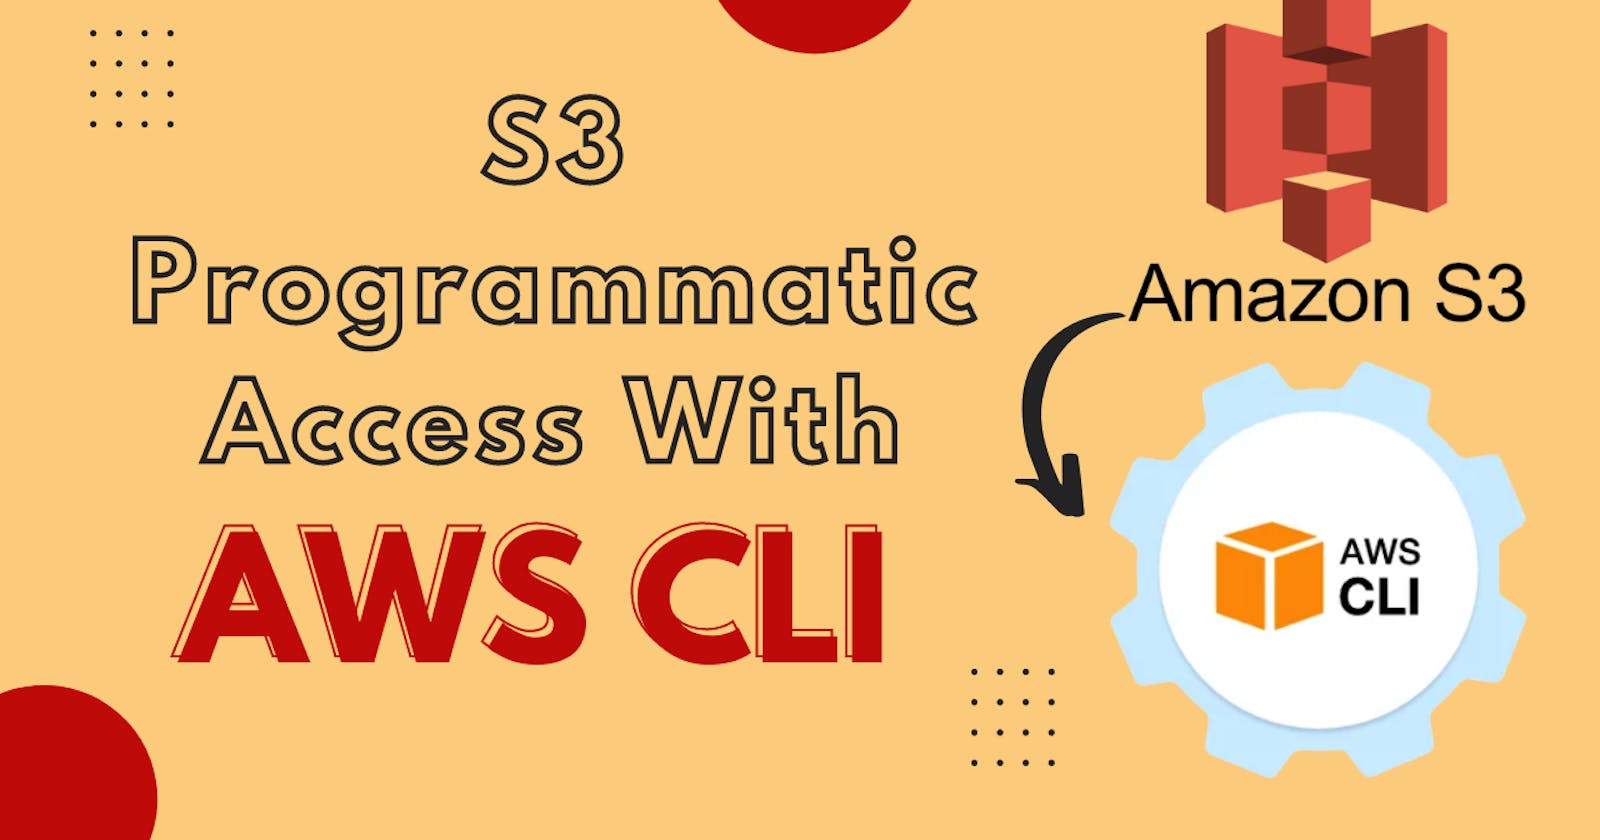 Day 43 - S3 Programmatic Access with AWS-CLI 💻 📁